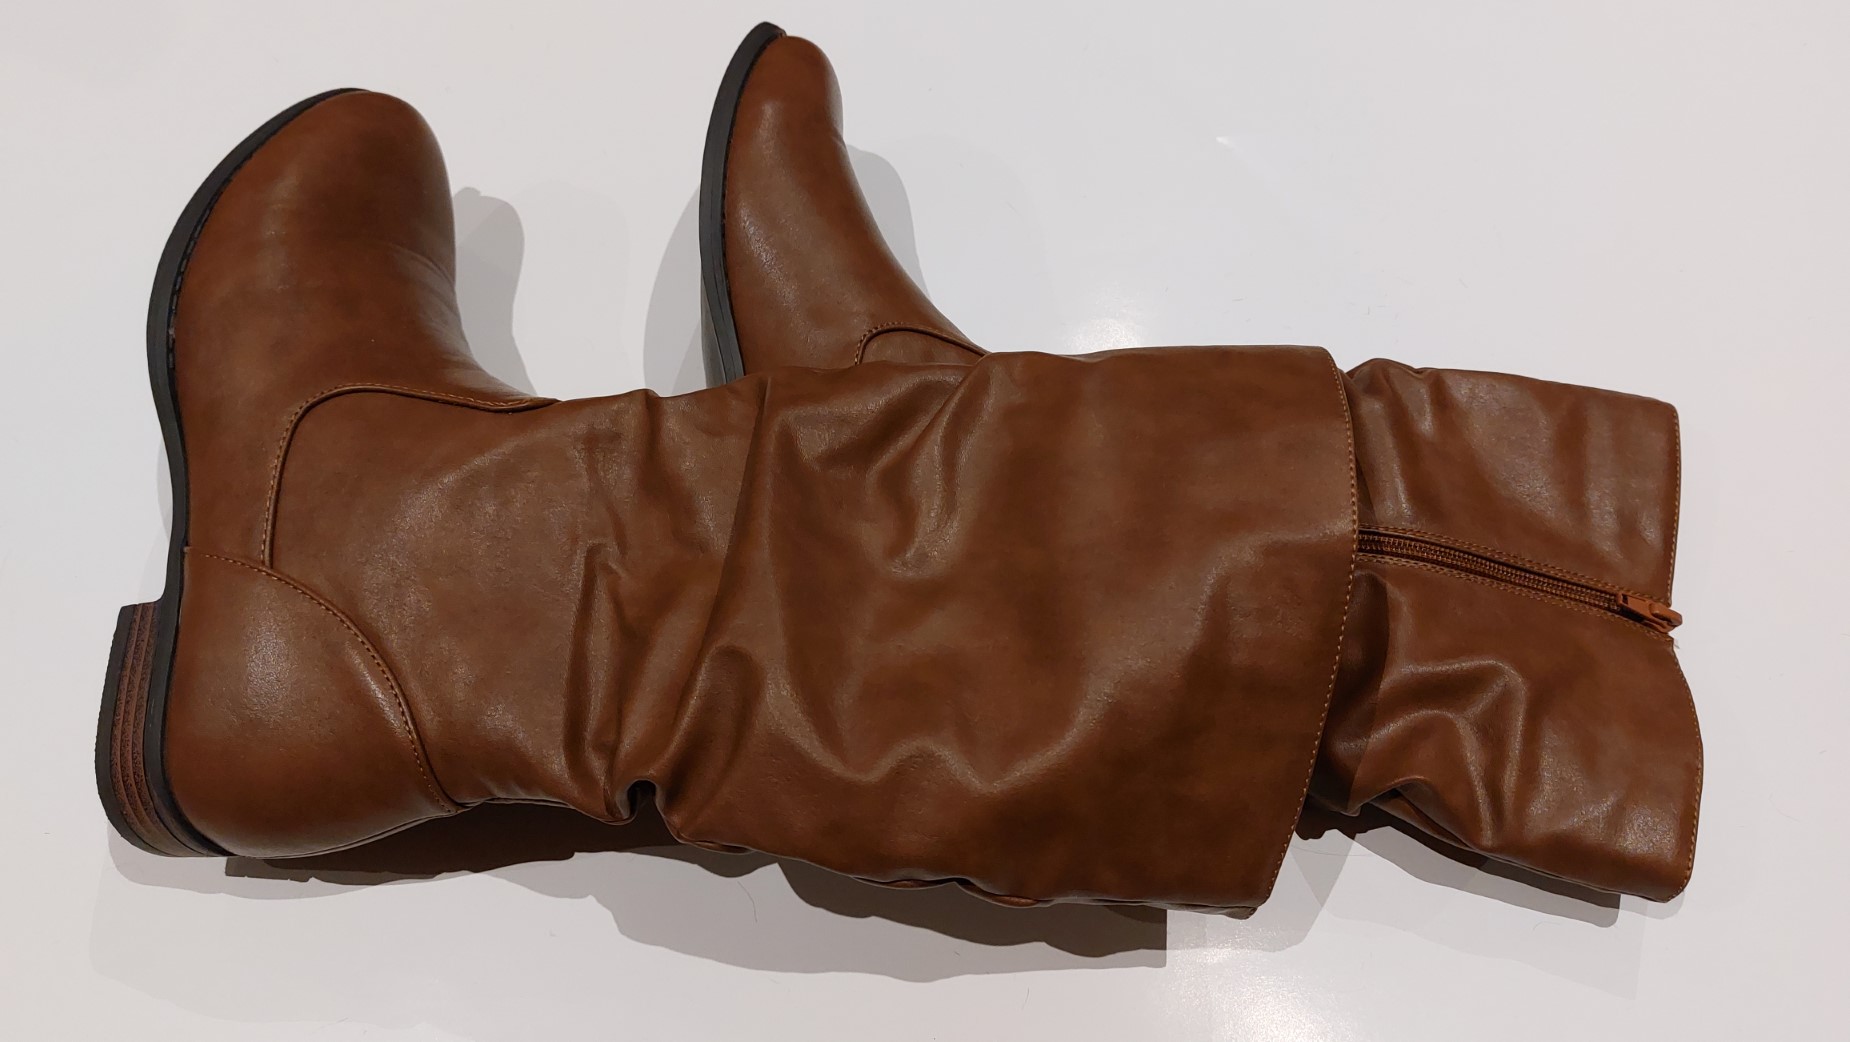 The boots I bought for the cosplay